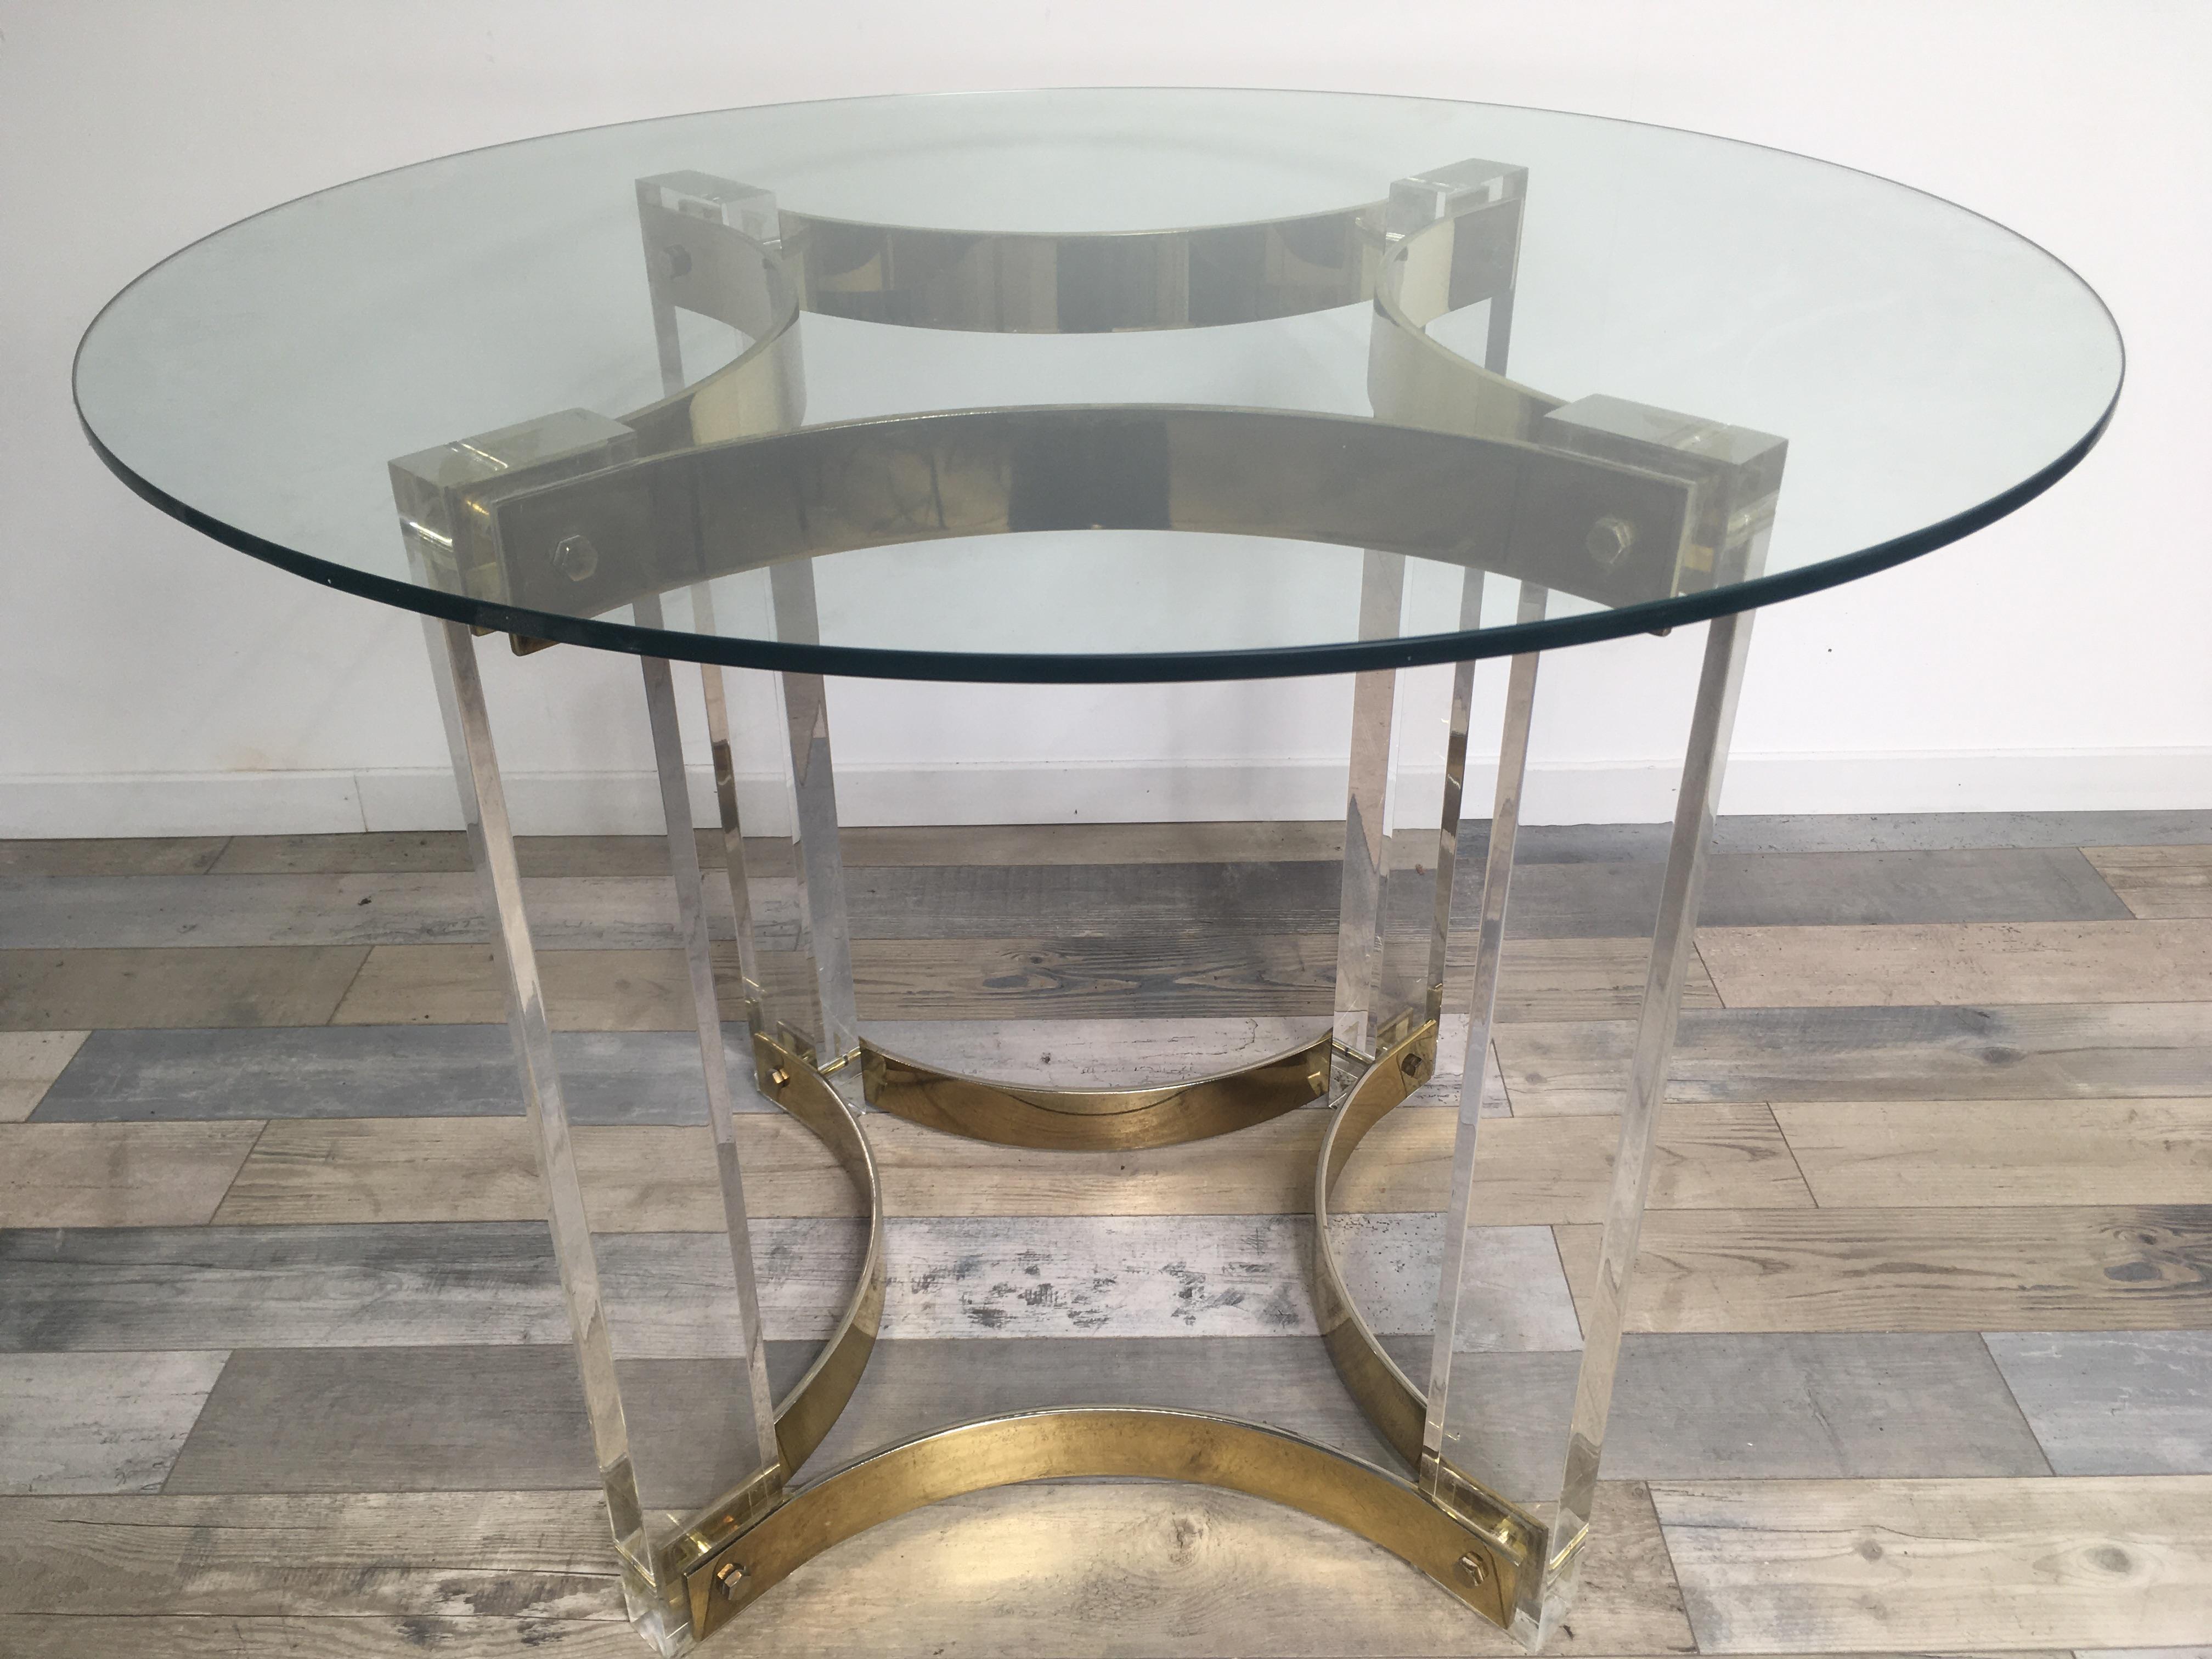 1970s Alessandro Albrizzi Italian design round pedestal table consisting of a graphic patian brass metal adorned with Lucite foot and a round glass tray.